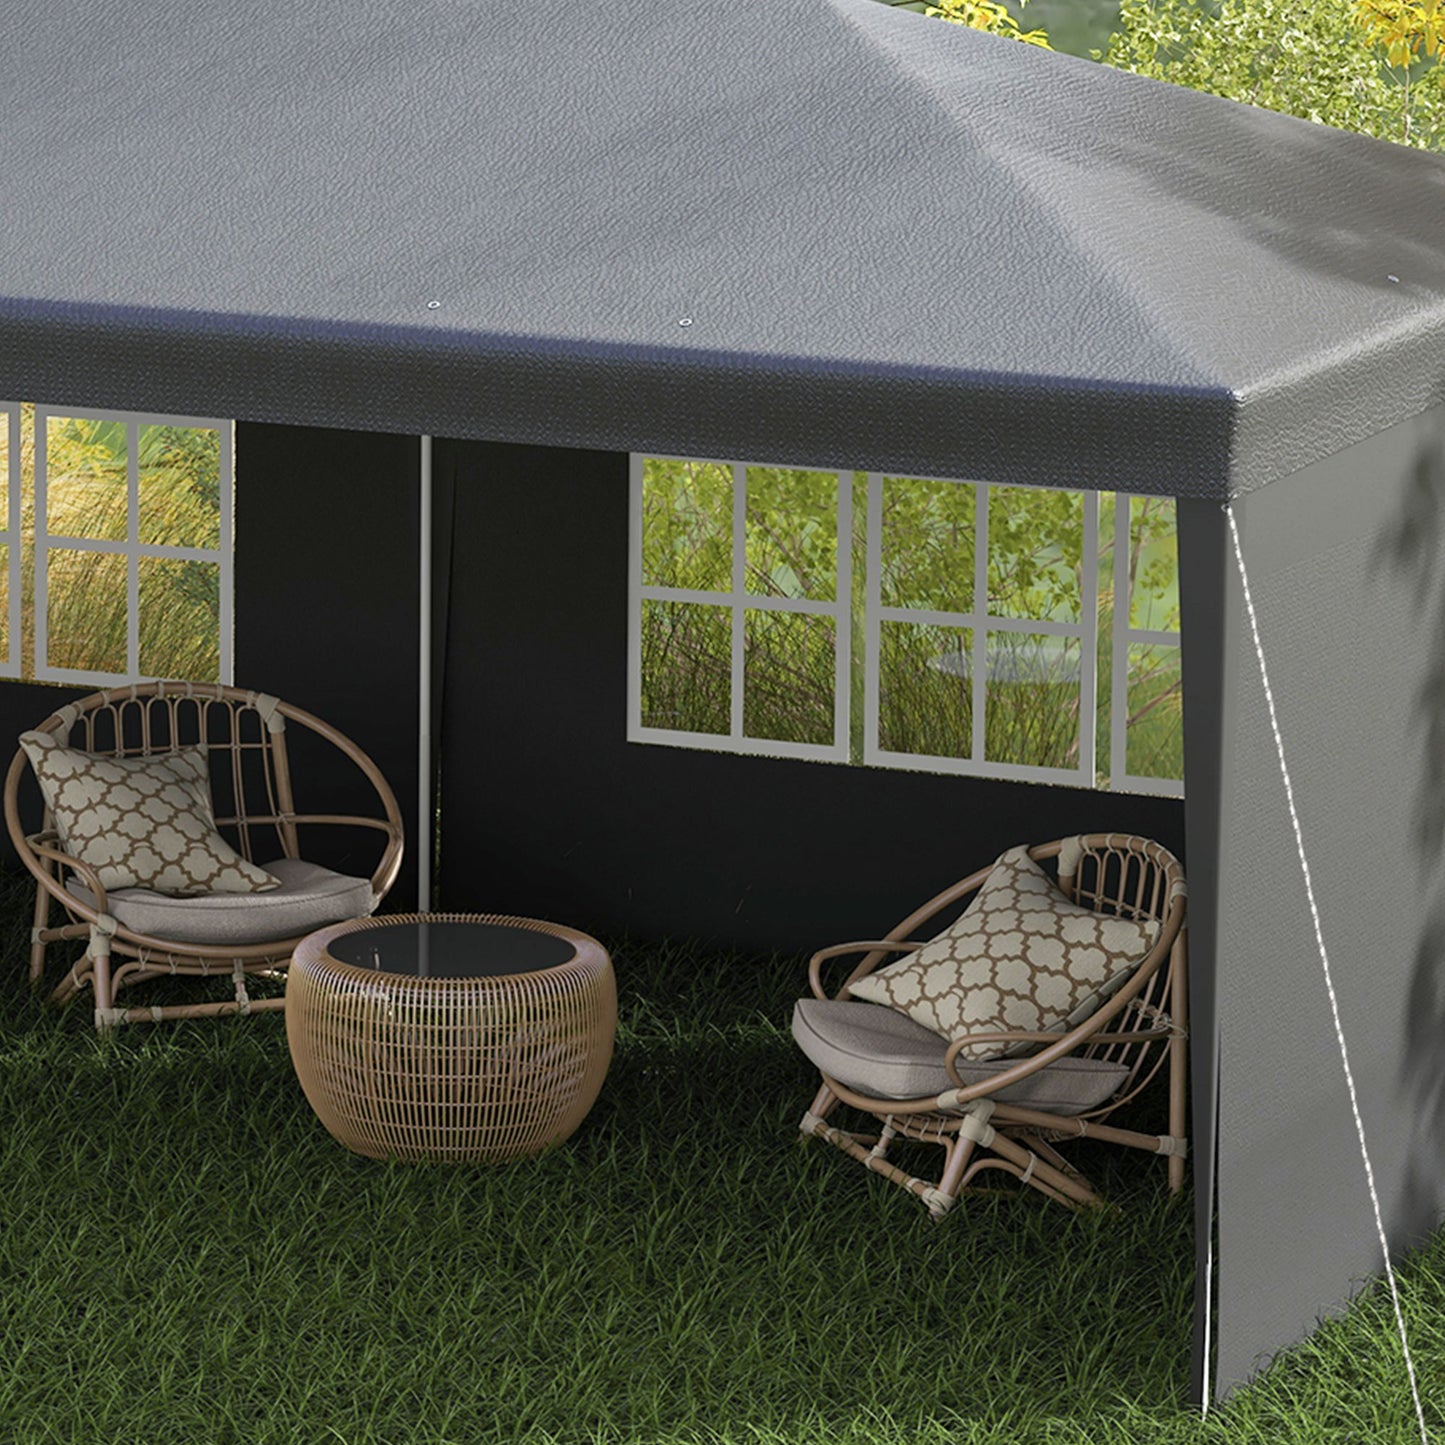 Outsunny 6 x 3 m Party Tent Gazebo Marquee Outdoor Patio Canopy Shelter with Windows and Side Panels, Dark Grey